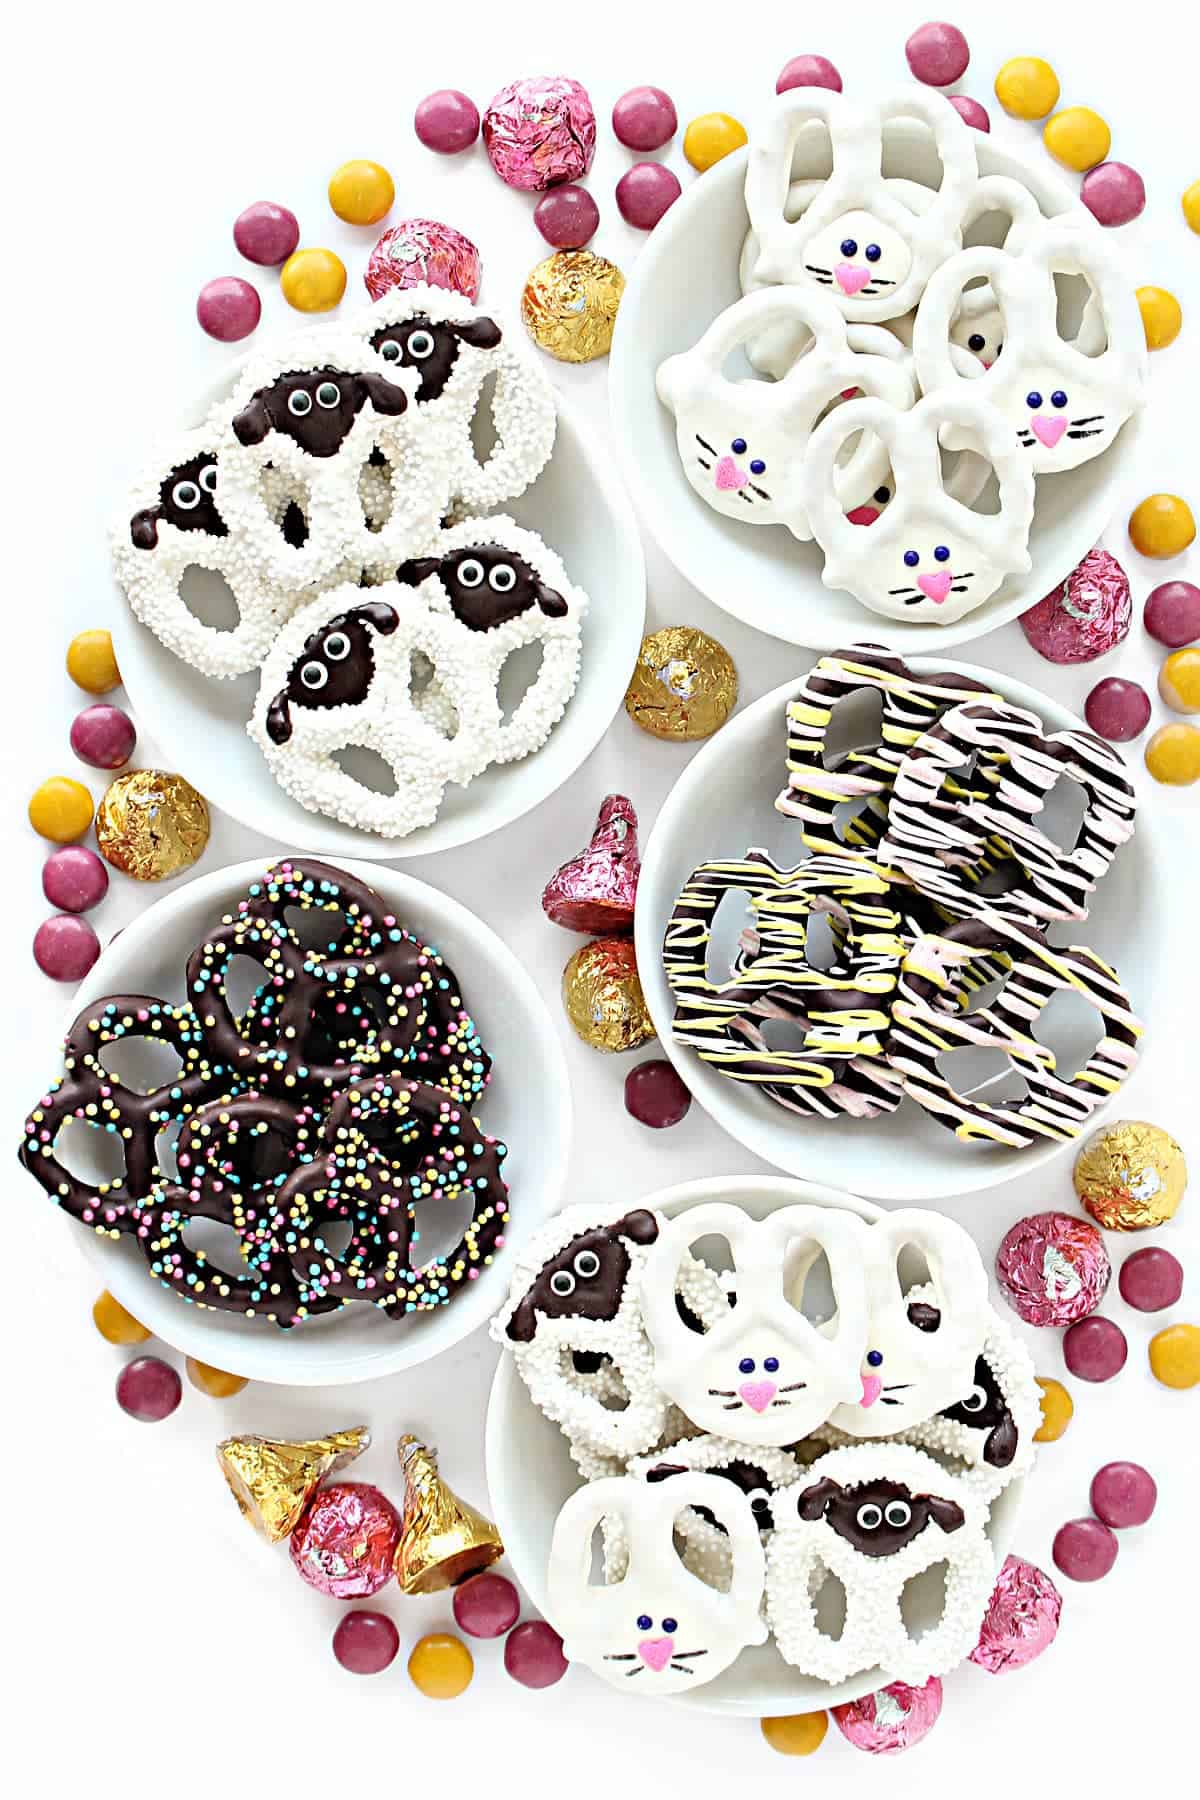 Pretzels made into bunnies, sheep, and decorated for Easter. 